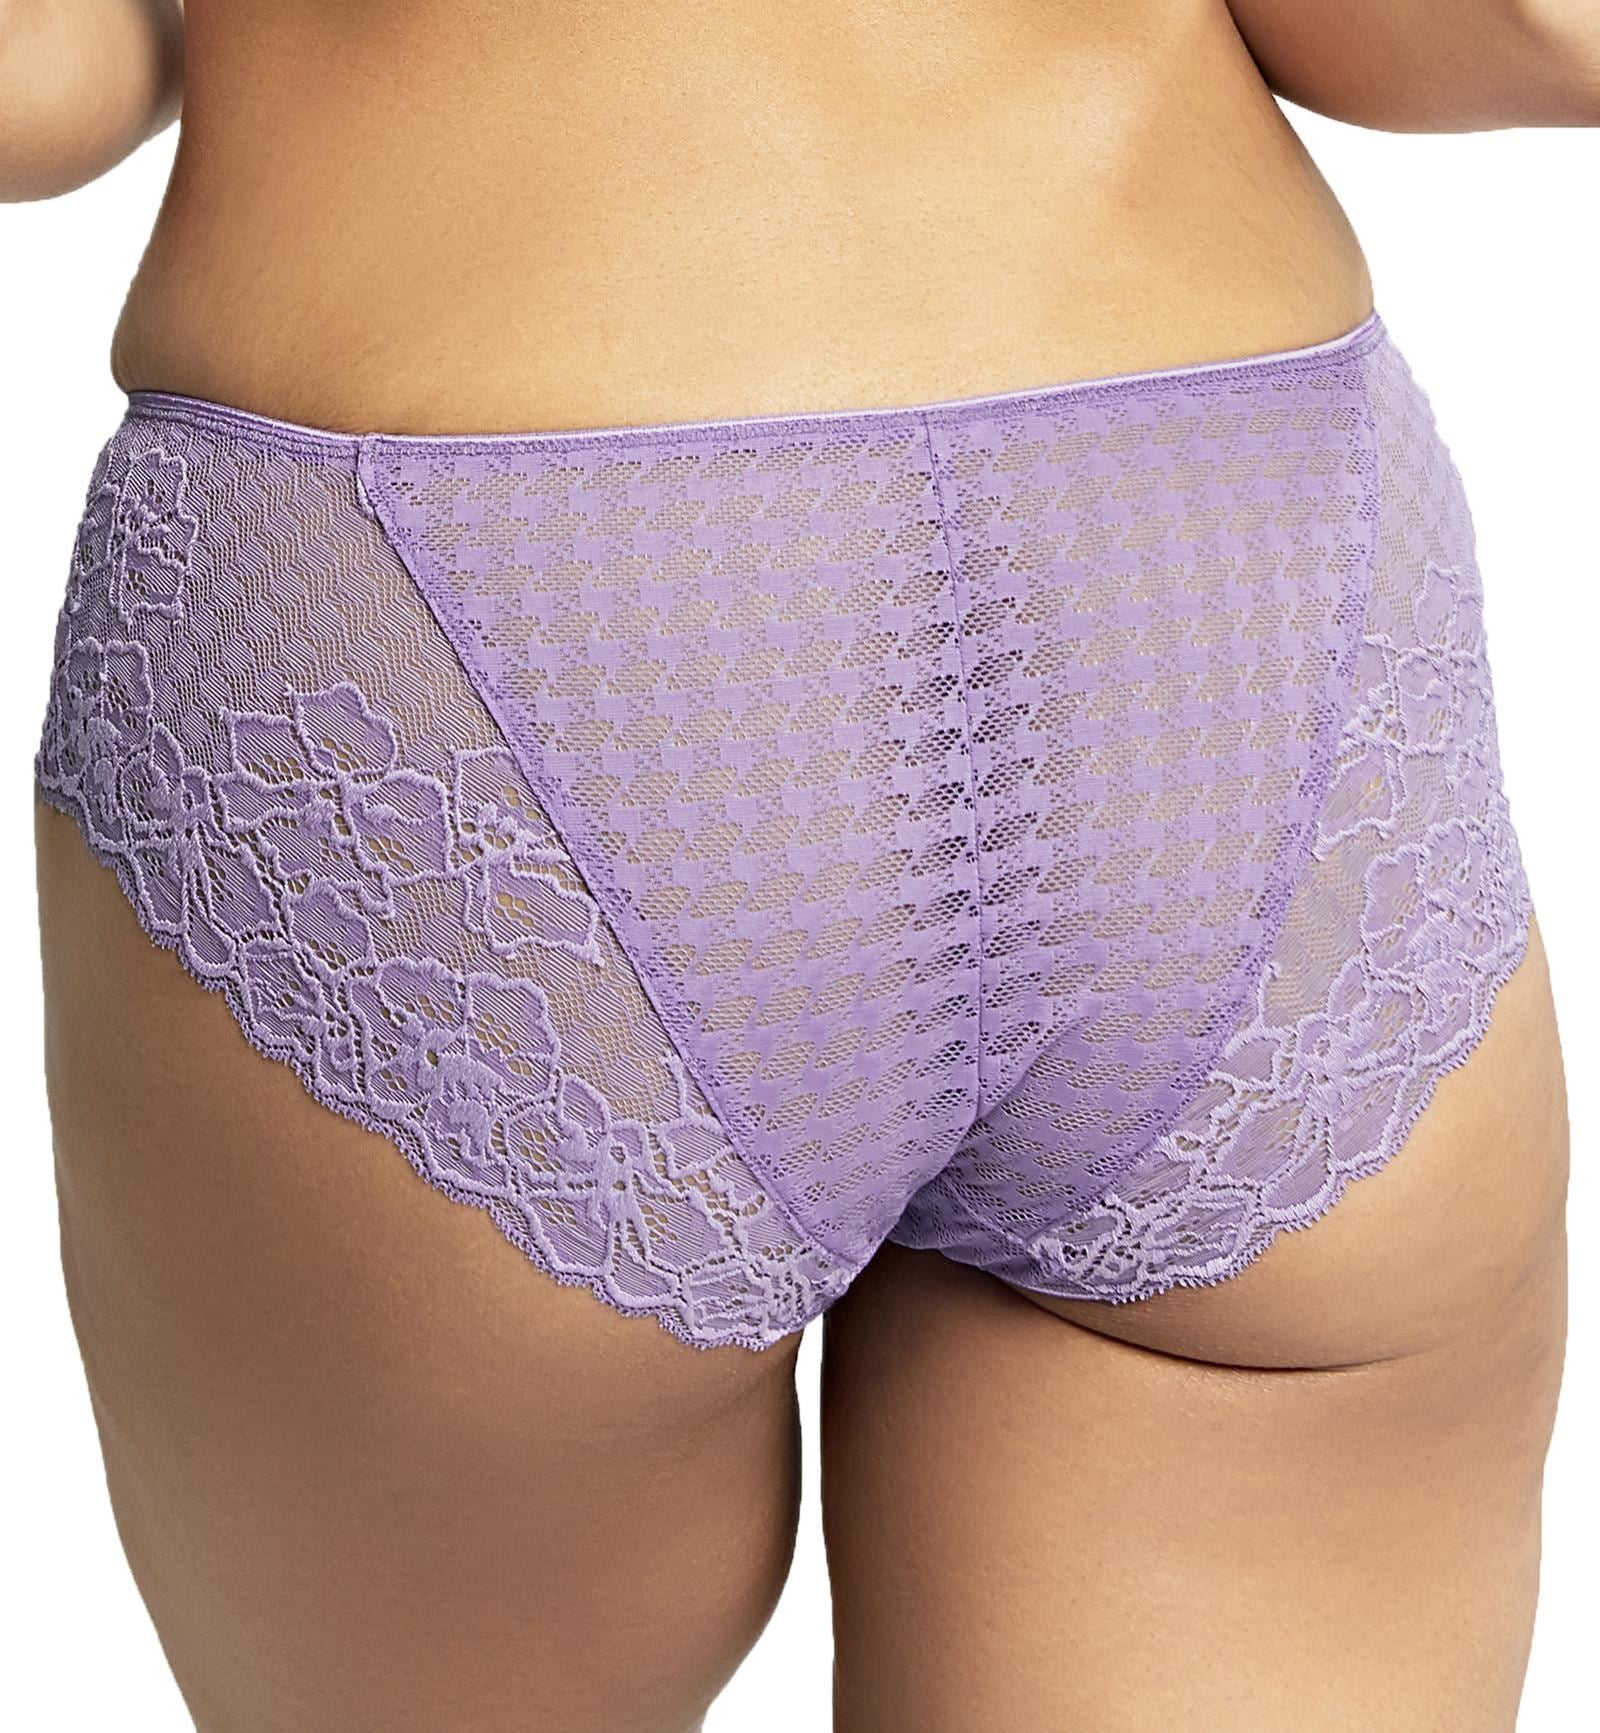 Panache Envy Matching Brief (7282),Small,Violet - Violet,Small